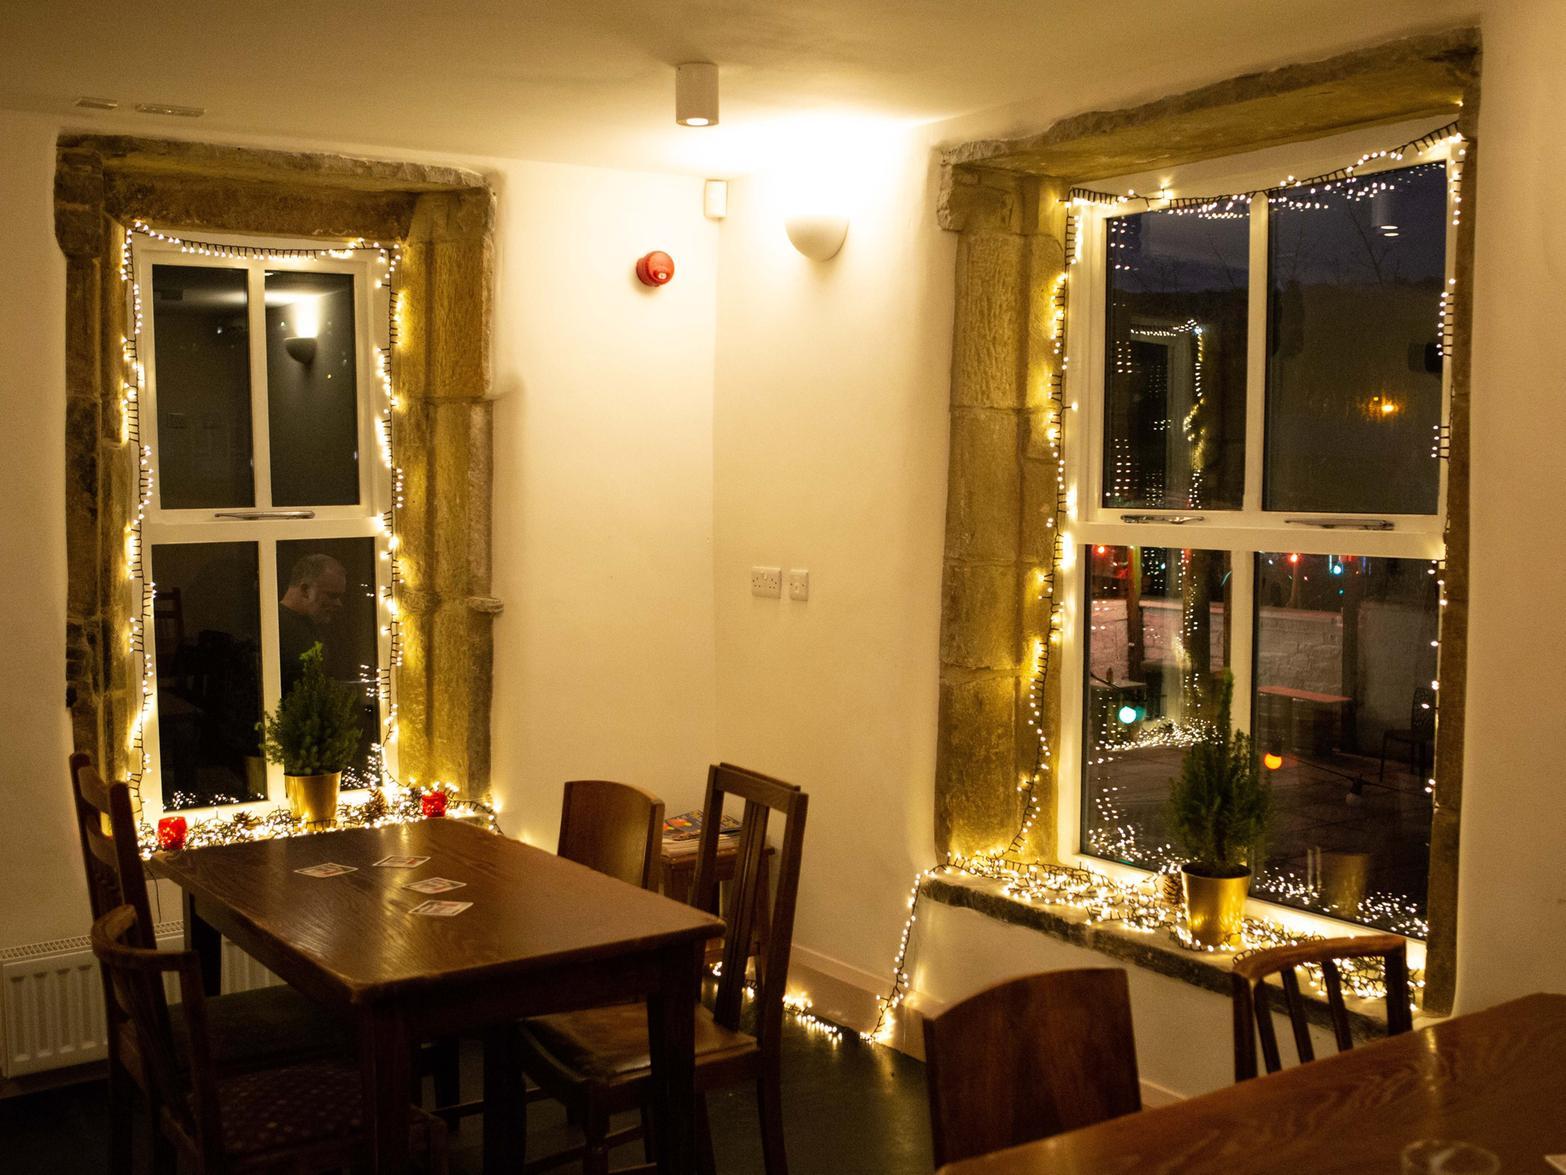 They welcomed their first customers just before Christmas after the community-backed refurbishment project